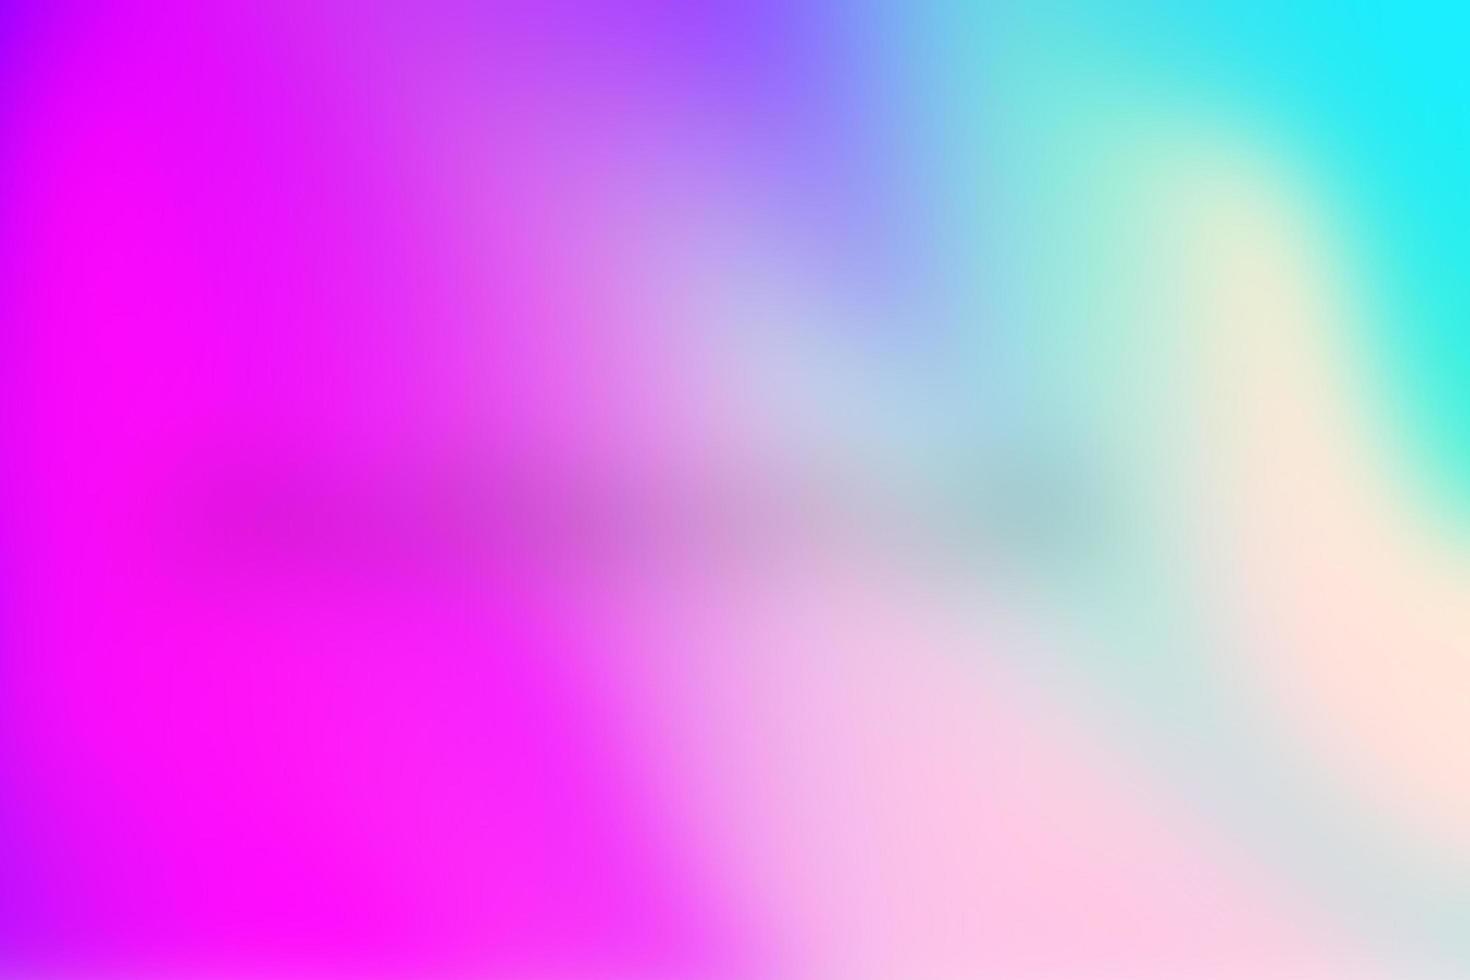 Abstract Gradient Background defocused luxury vivid blurred colorful texture wallpaper Free Photo